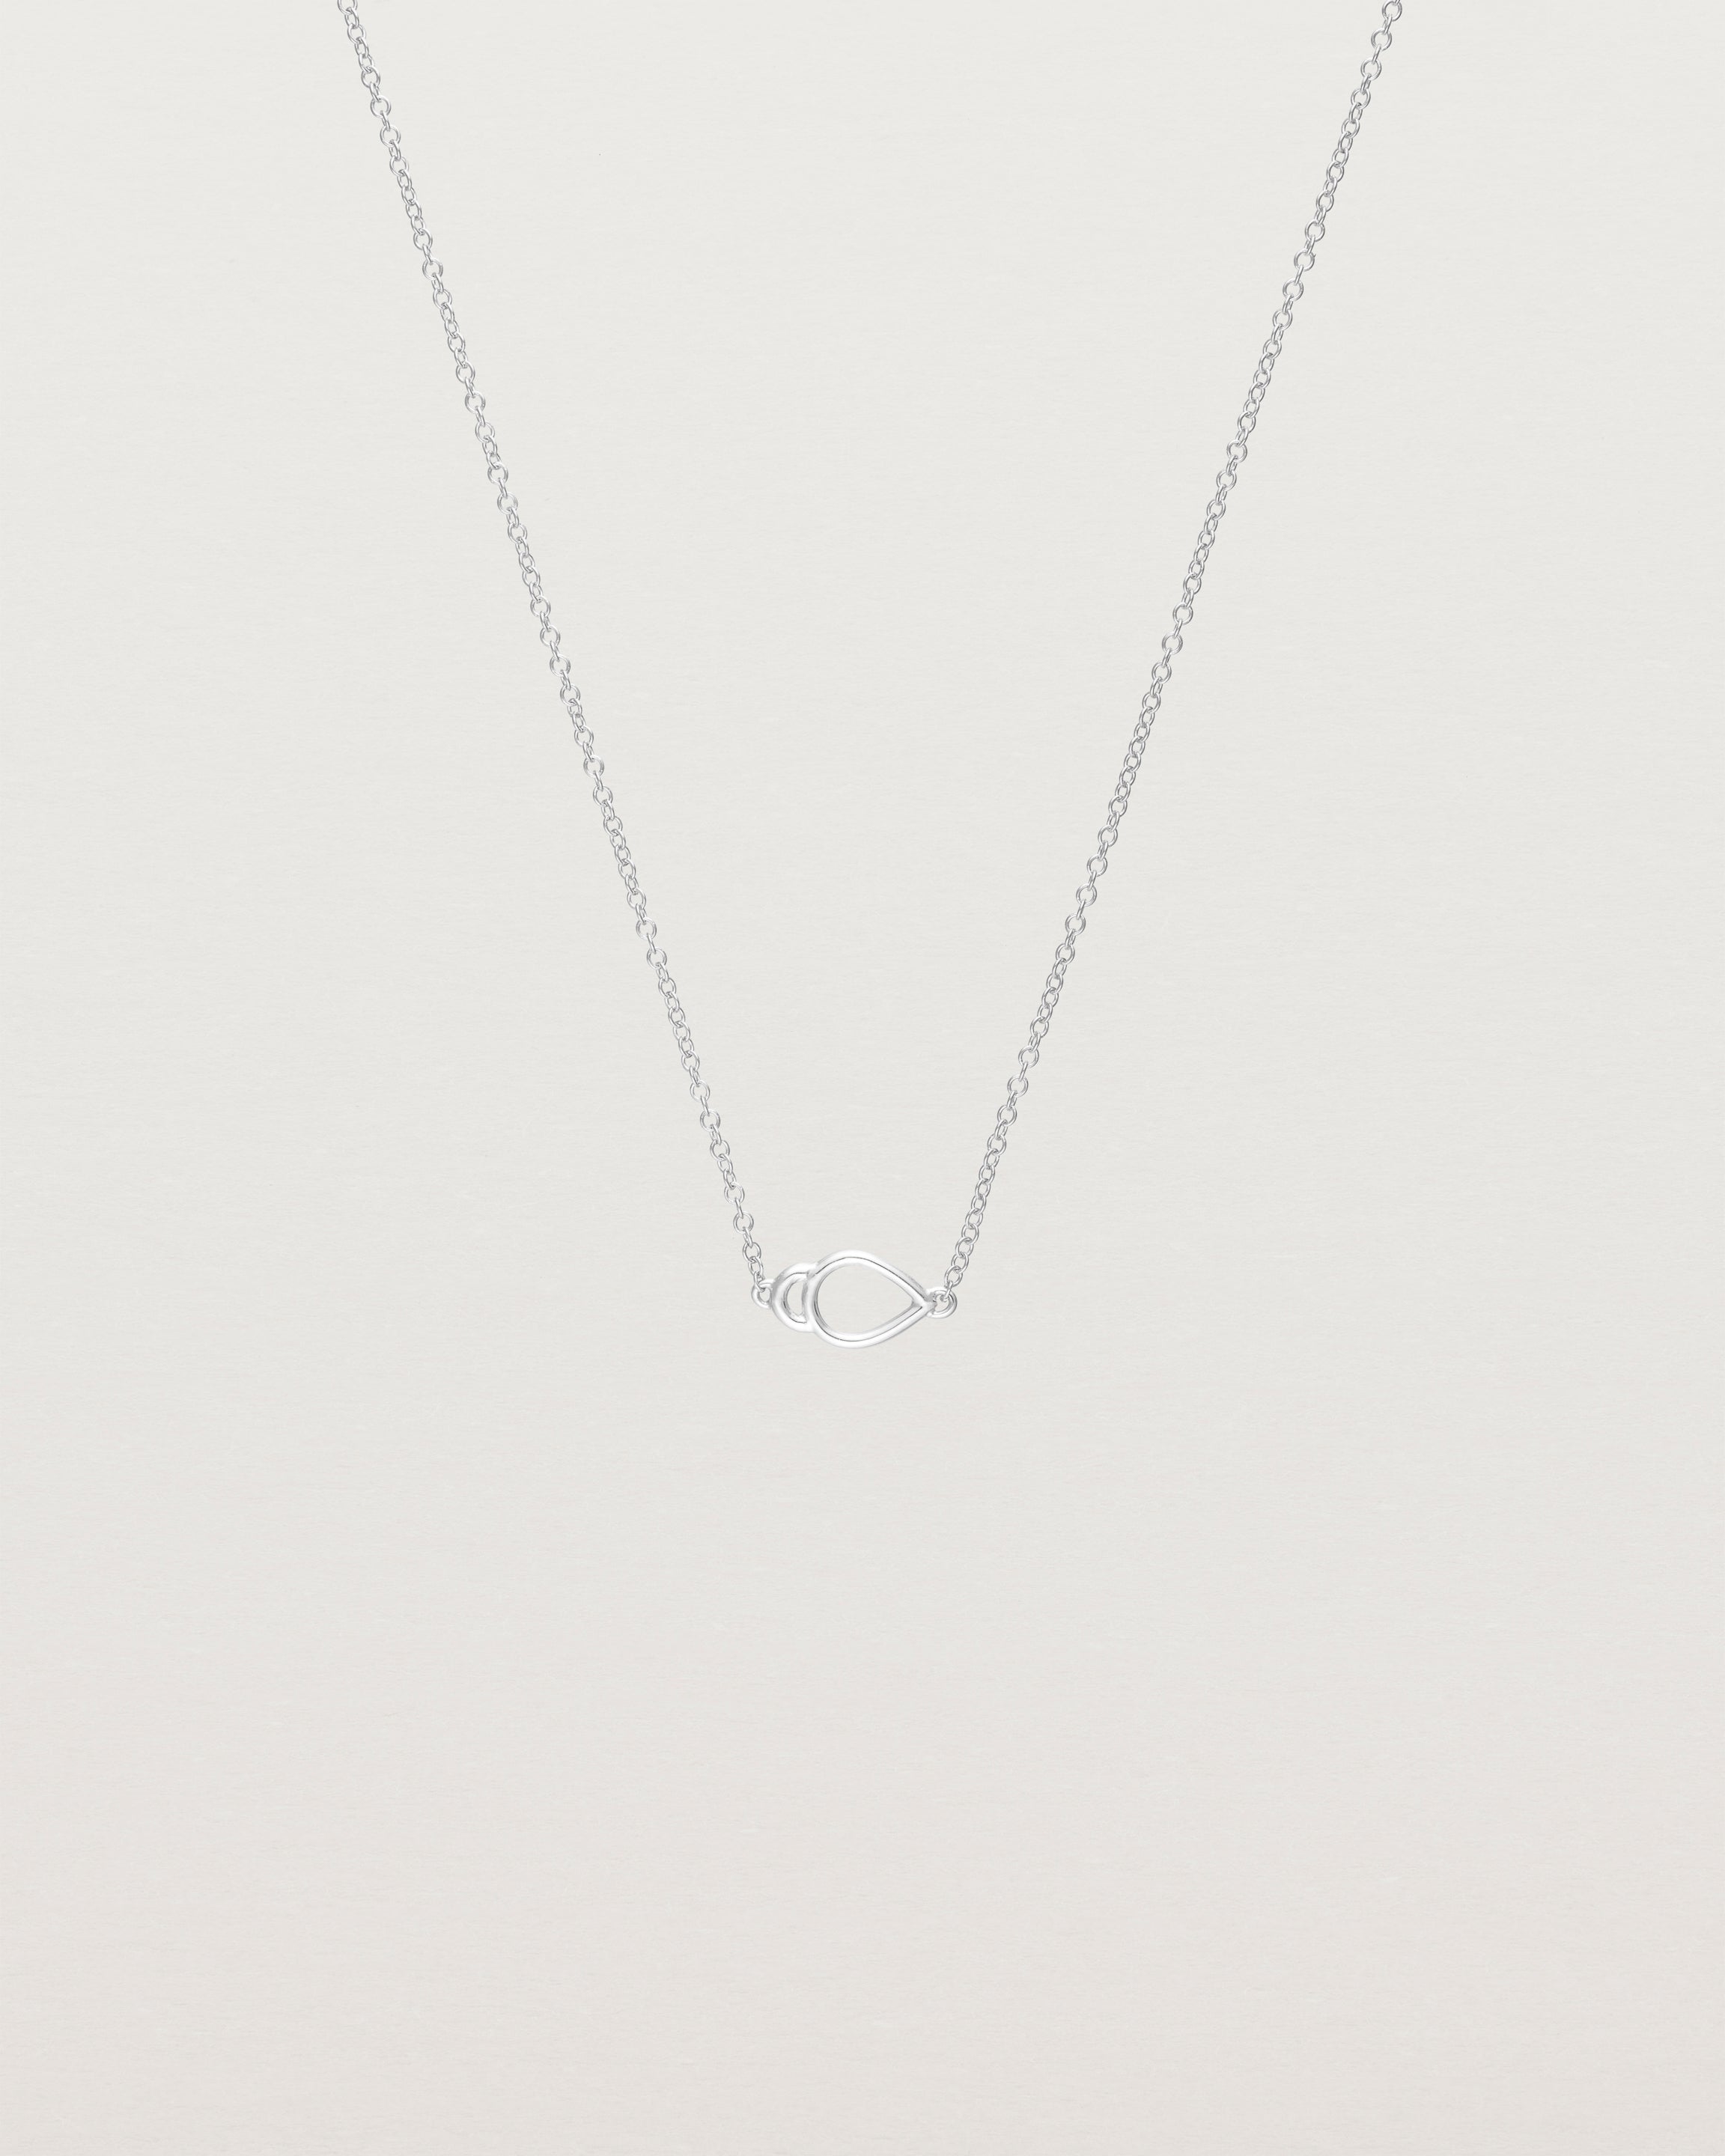 Front view of the Oana Necklace in Sterling Silver.